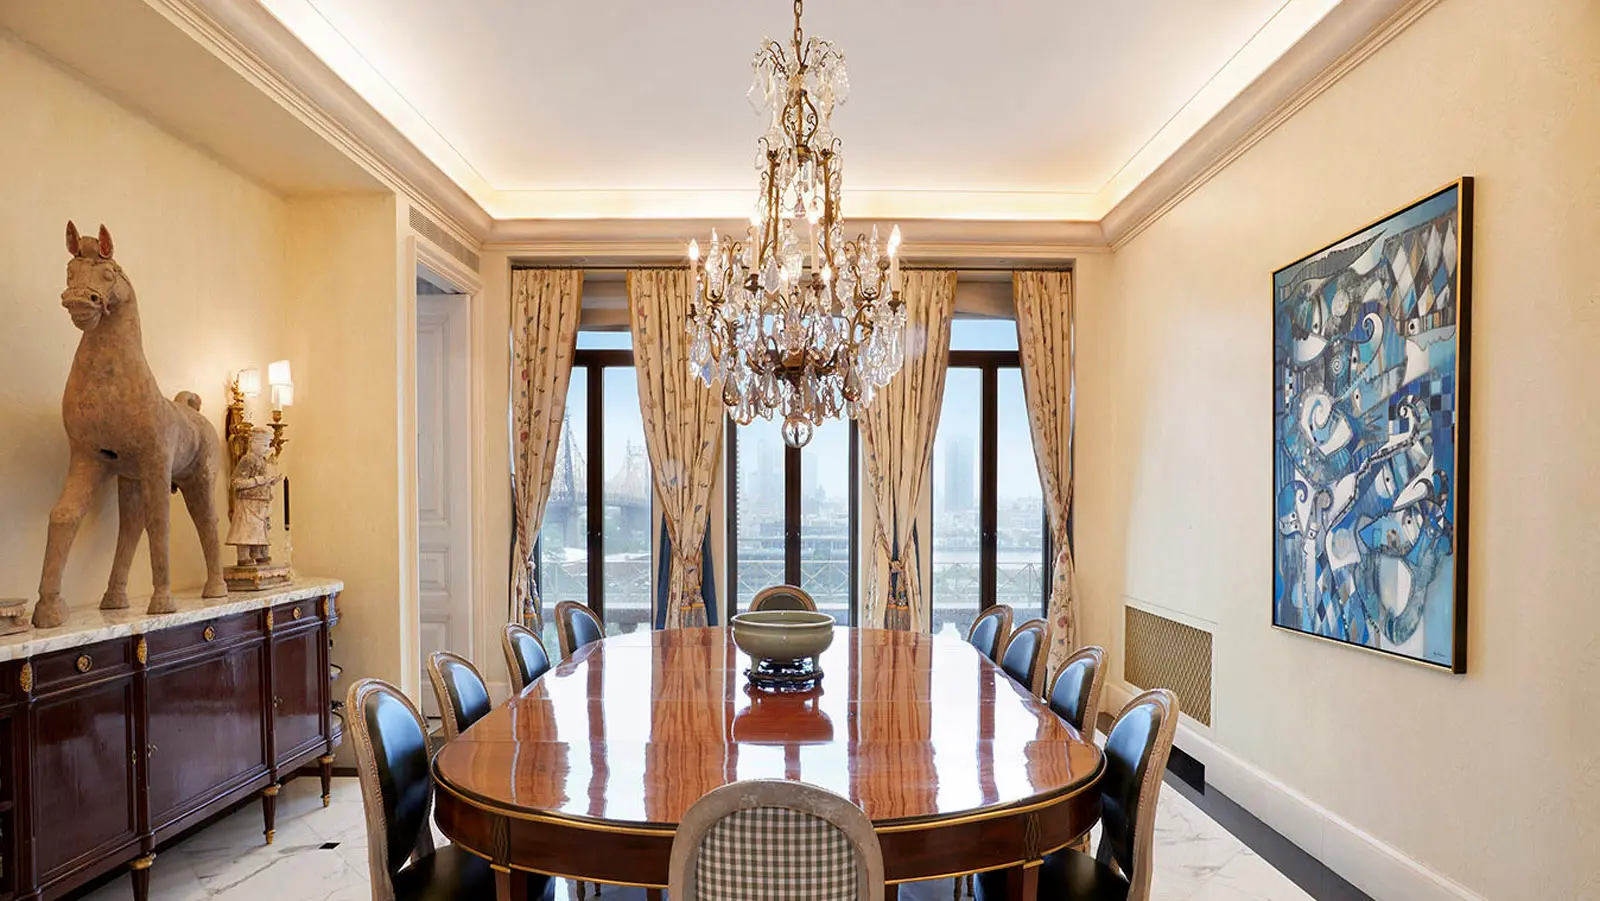 4 Sutton Place, 465 East 57th Street